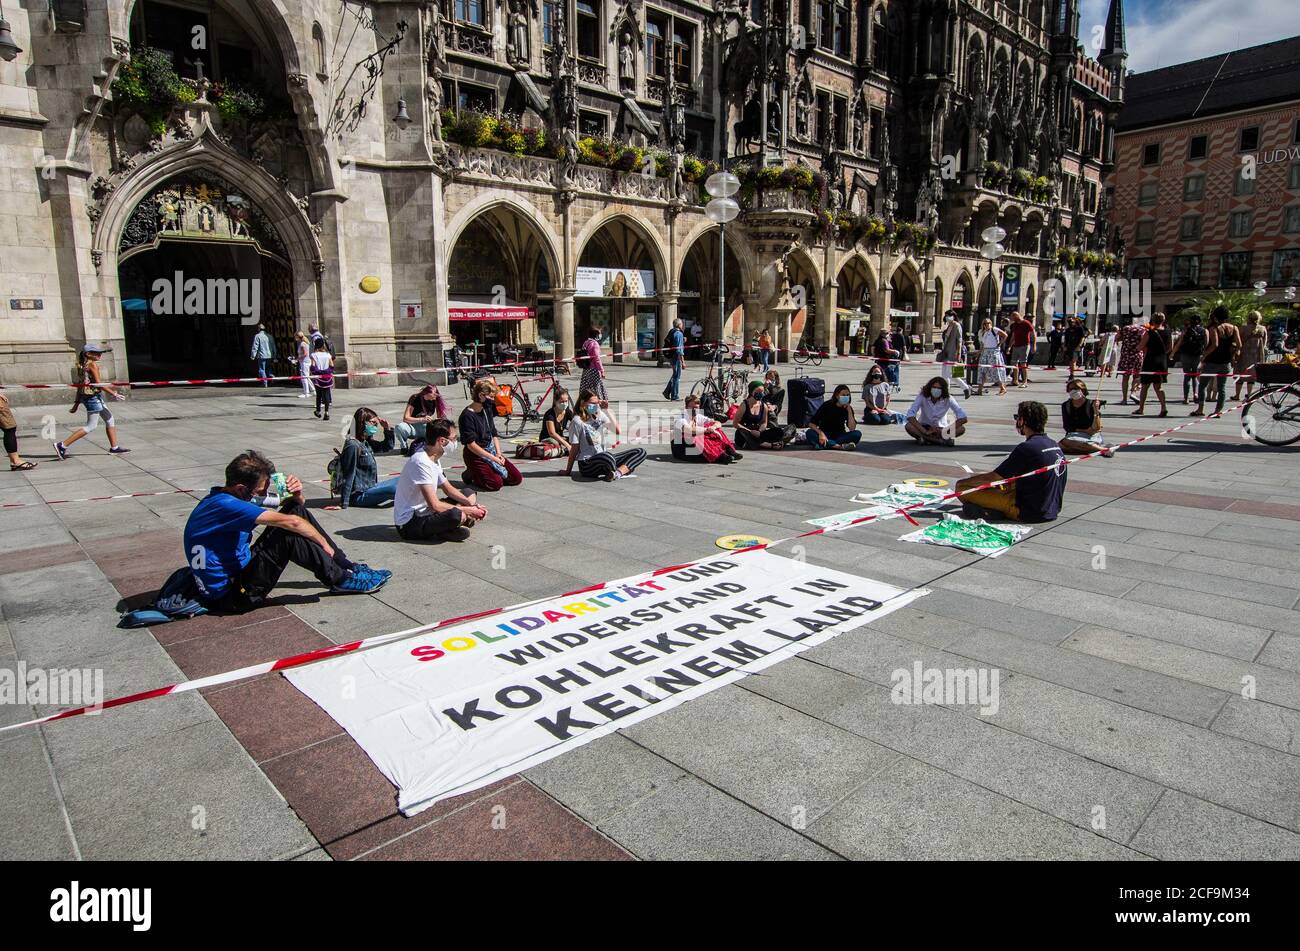 Munich, Bavaria, Germany. 4th Sep, 2020. After a long hiatus due to the Coronavirus crisis, Fridays for Future returned to the streets of Munich to stage smaller demos to build back up to the global climate strike in three weeks. Among the topics the group brought attention to were solar energy and the Mercosur arrangement with the EU. Fridays for Future originated with Greta Thunberg, a 15 year old Swedish student who protested in front of the Swedish Parliament demanding action against climate change. Since then, the so called Fridays for Future strikes have become a worldwide phenome Stock Photo